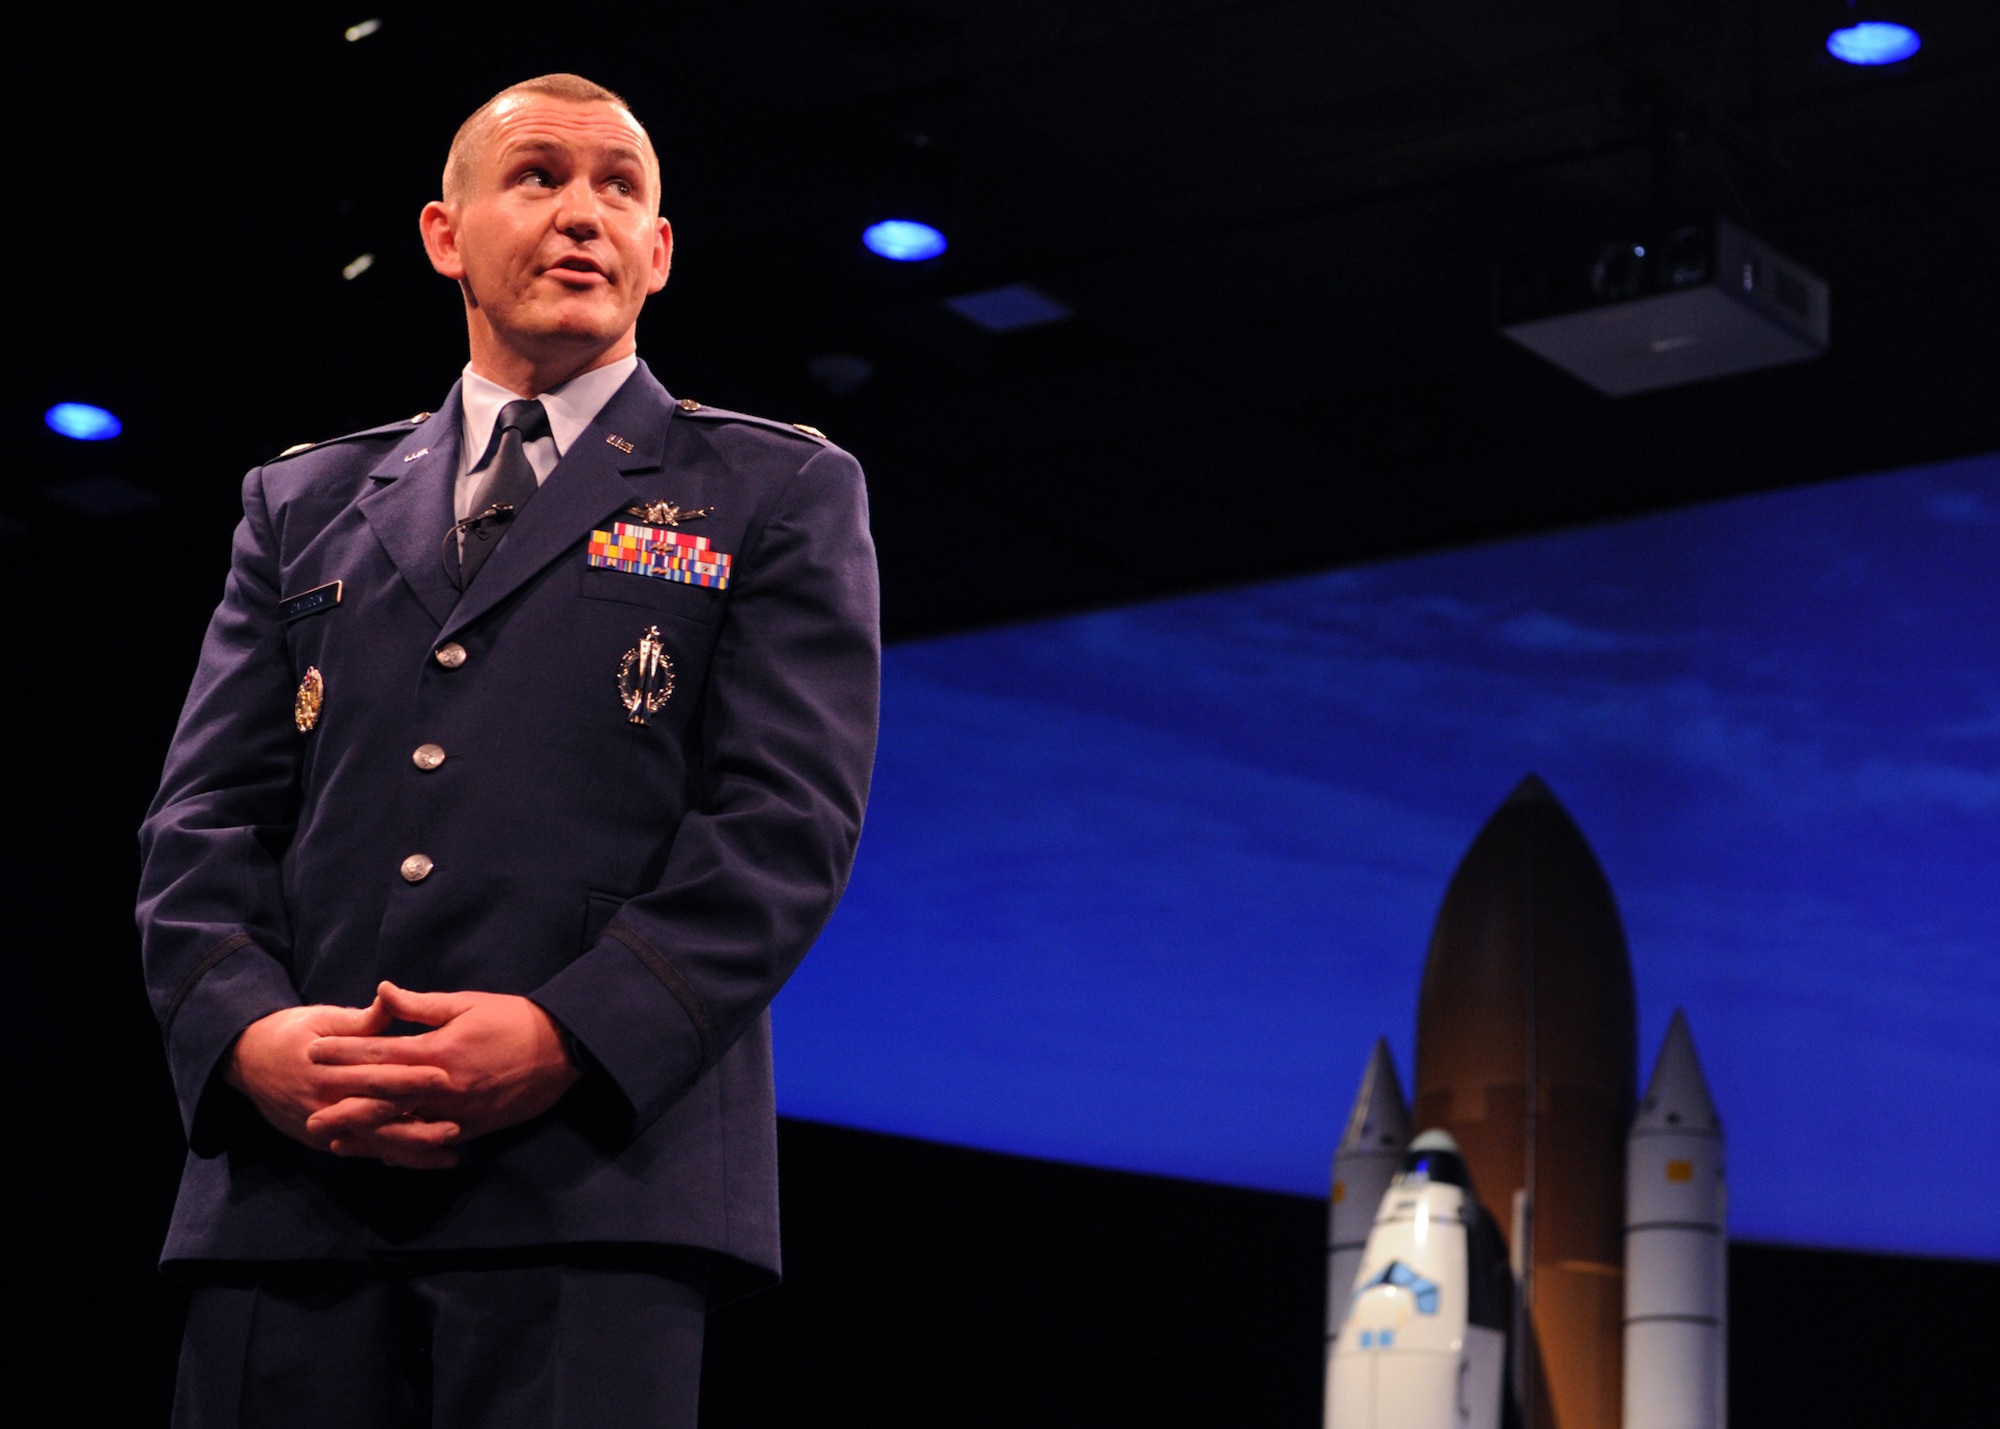 Maj. Benjamin Calhoon, the chief of the Positioning, Navigation and Timing Branch within the Space Operations Division of Headquarters Air Force, gives a GPS lecture at the Smithsonian’s National Air and Space Museum in Washington D.C., July 17, 2015. The Air Force celebrated the 20th anniversary of the GPS. (U.S. Air force photo/Staff Sgt. Whitney Stanfield)